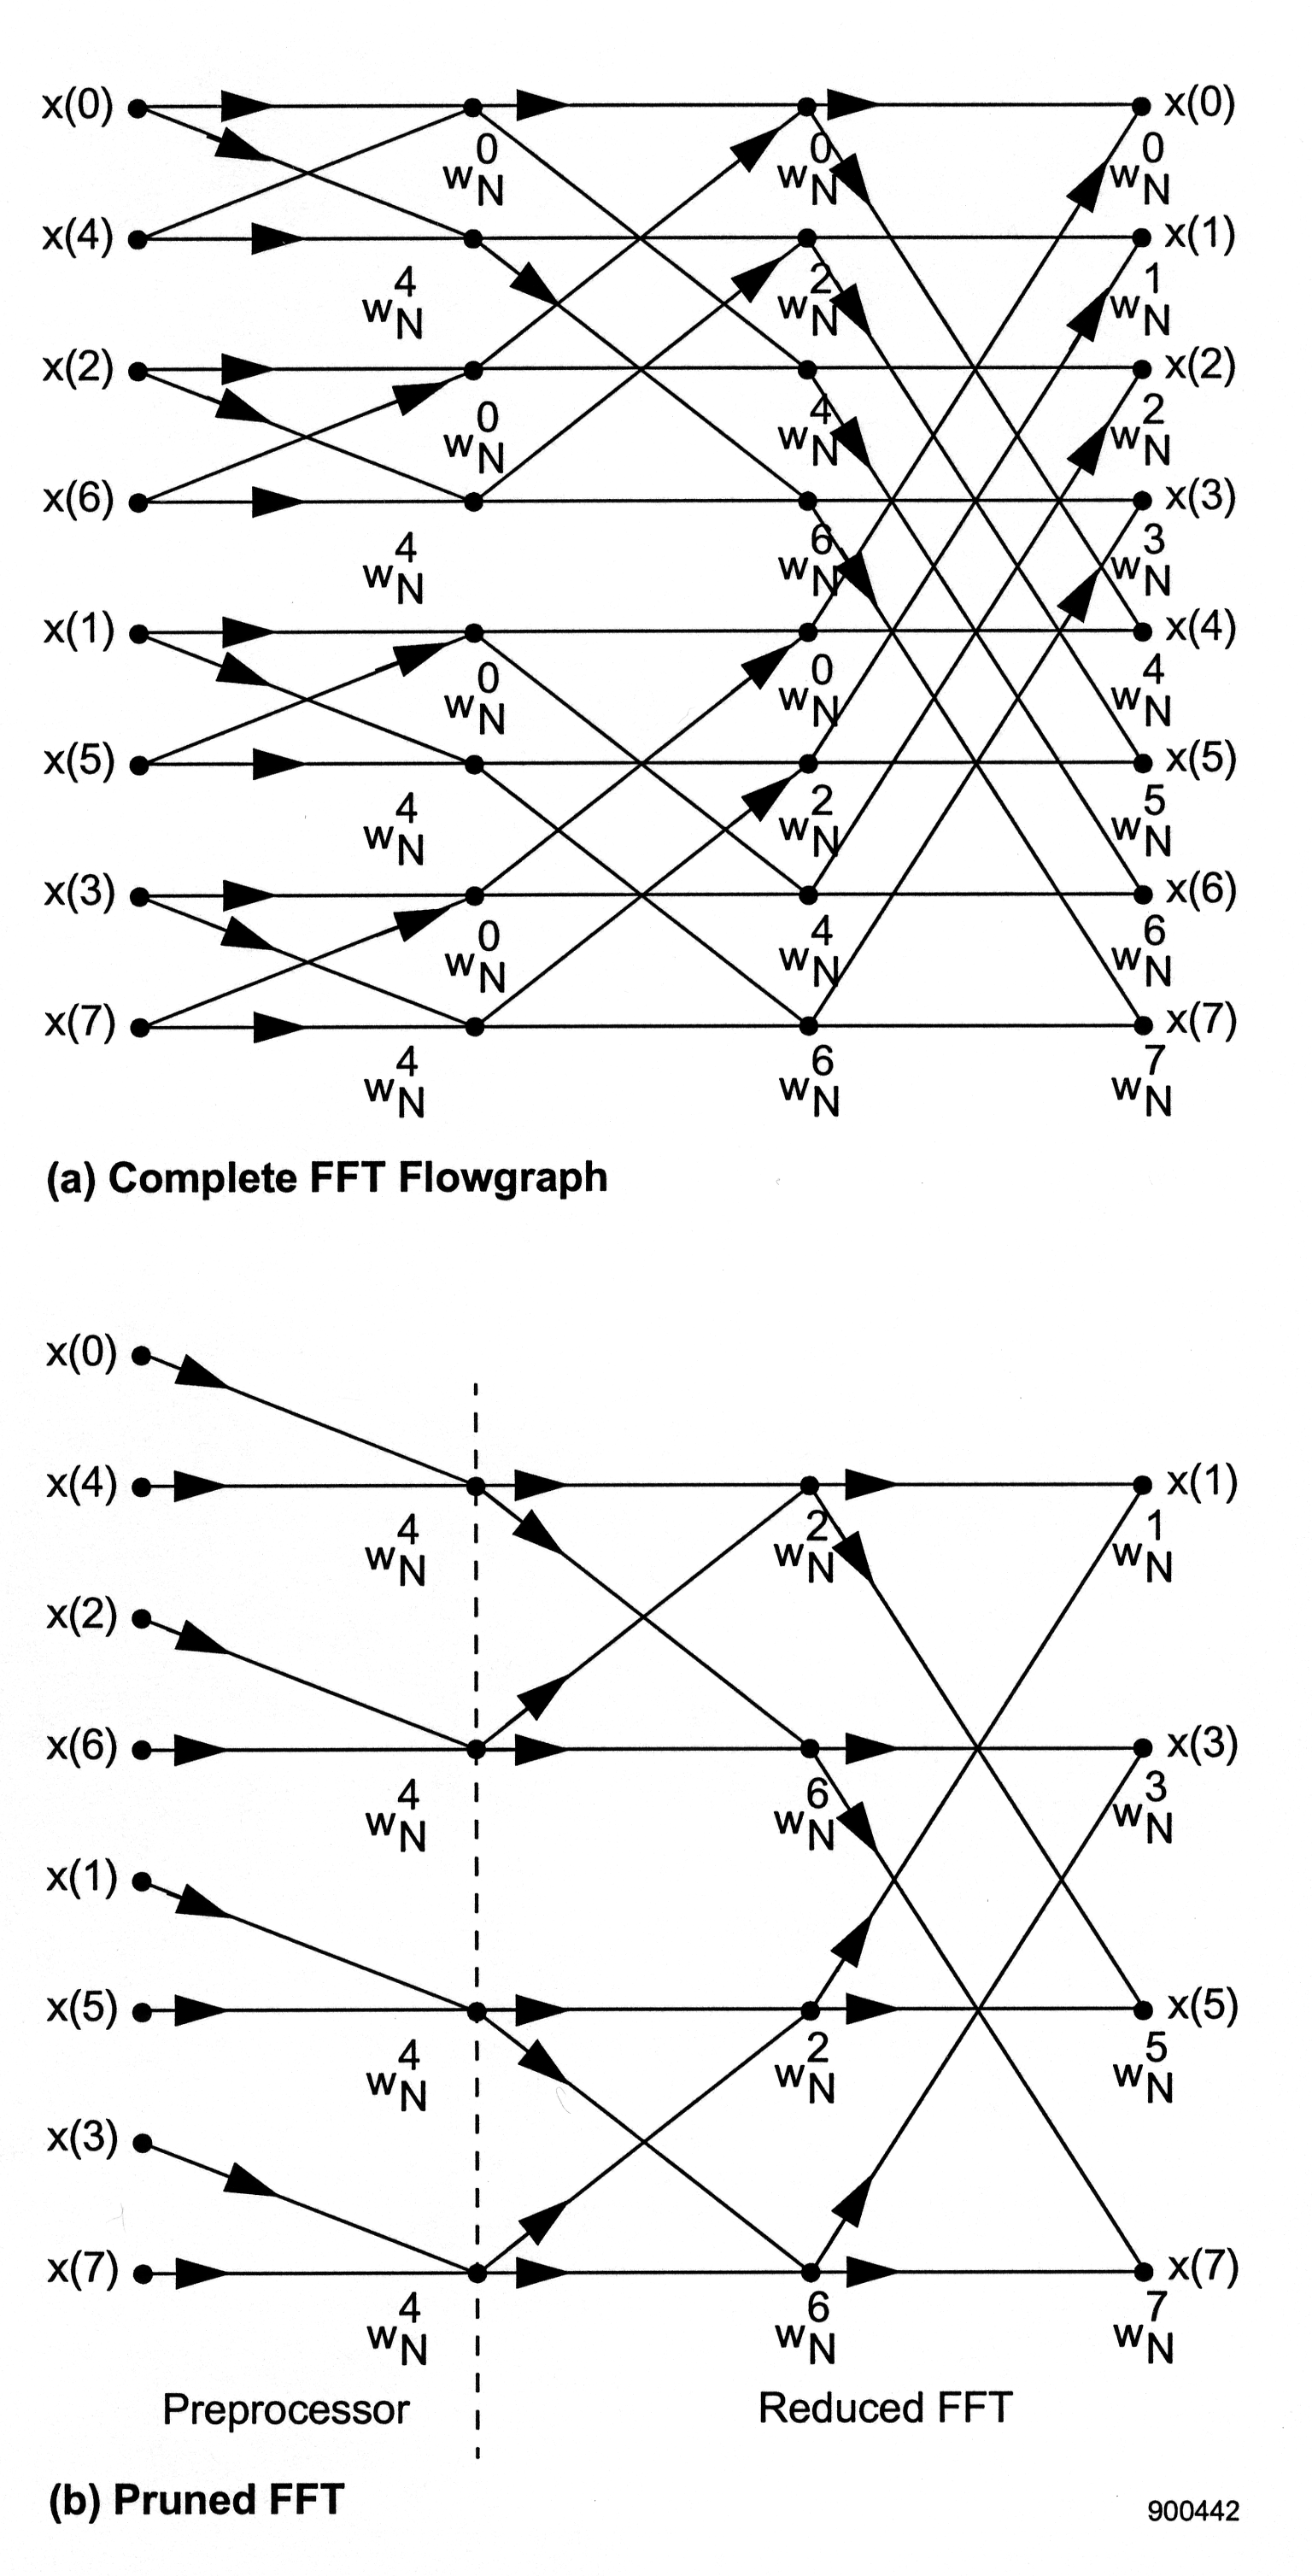 Figure ten is comprised of two FFT flowgraphs. In part a, There are eight horizontal lines, four points along the lines, and various arrows pointing in diagonals across the lines. The lines on the left are labeled from top to bottom, x(0), x(4), x(2), x(6), x(1), x(5), x(3), and x(7). For the each horizontal section on each line, there is an arrow pointing to the right. In the section from the first point to the second point, a diagonal arrow moves down one line for x(0), x(2), x(1), and x(3) and a criss-crossing arrow moves up one line for  x(4), x(6), x(5), and x(7). In between the x(4) and x(2) lines, the x(6) and x(1) lines, the x(5) and x(3) lines, and below the x(7) line is a label that reads w^4_N. Aligned with the second point in between x(0) and x(4), x(2) and x(6), x(1) and x(5), x(3) and x(7), is the label w^0_N. The section of diagonal lines in between the second and third points across the figure contain diagonal spots that move two spaces down for x(0), x(4), x(1), and x(5), and two spaces up for x(2), x(6), x(3), and x(7). Aligned with the third points in between every line from top to bottom are labels that read w^0_N, w^2_N, w^4_N, w^6_N, w^0_N, w^2_N, w^4_N, and w^6_N. From the third to the fourth points, the diagonal lines move four spaces down from x(0), x(4), x(2), and x(6), and four spaces up from x(1), x(5), x(3), and x(7) In between the fourth spaces are the following labels from top to bottom, w^0_N, w^1_N, w^2_N, w^3_N, w^4_N, w^5_N, w^6_N, w^7_N. To the right of the fourth points are the labels from top to bottom, x(0), x(1), x(2), x(3), x(4), x(5), x(6), and x(7). In part b, there are 8 lines that converge to four lines, with a similar setup as part a, four points across with diagonal lines in between. The eight beginning lines are labeled from top to bottom, x(0), x(4), x(2), x(6), x(1), x(5), x(3), and x(7). The lines following x(0), x(2), x(1), and x(3) are diagonal, pointing one space down, thus terminating those lines across and leaving four remaining horizontal lines across x(4), x(6), x(5), and x(7). Below these horizontal lines, and to the right of the second point, is the label w^4_N. The lines continue horizontally, and after the third point are the labels w^2_N, w^6_N, w^2_N, and w^6_N. After the fourth point are the labels w^1_N, w^3_N, w^5_N, and w^7_N. In between the second and third points, diagonal lines point one space down on x(4) and x(5), and point one space up on x(6) and x(7). In between points three and four are diagonal lines that point two lines down for  x(4) and x(6) and two lines up for x(5) and x(7). To the right of the four lines are the labels x(1), x(3), x(5), and x(7). A vertical dashed line in the second point divides the left part of the flowgraph as Preprocessor and the right part as Reduced FFT.